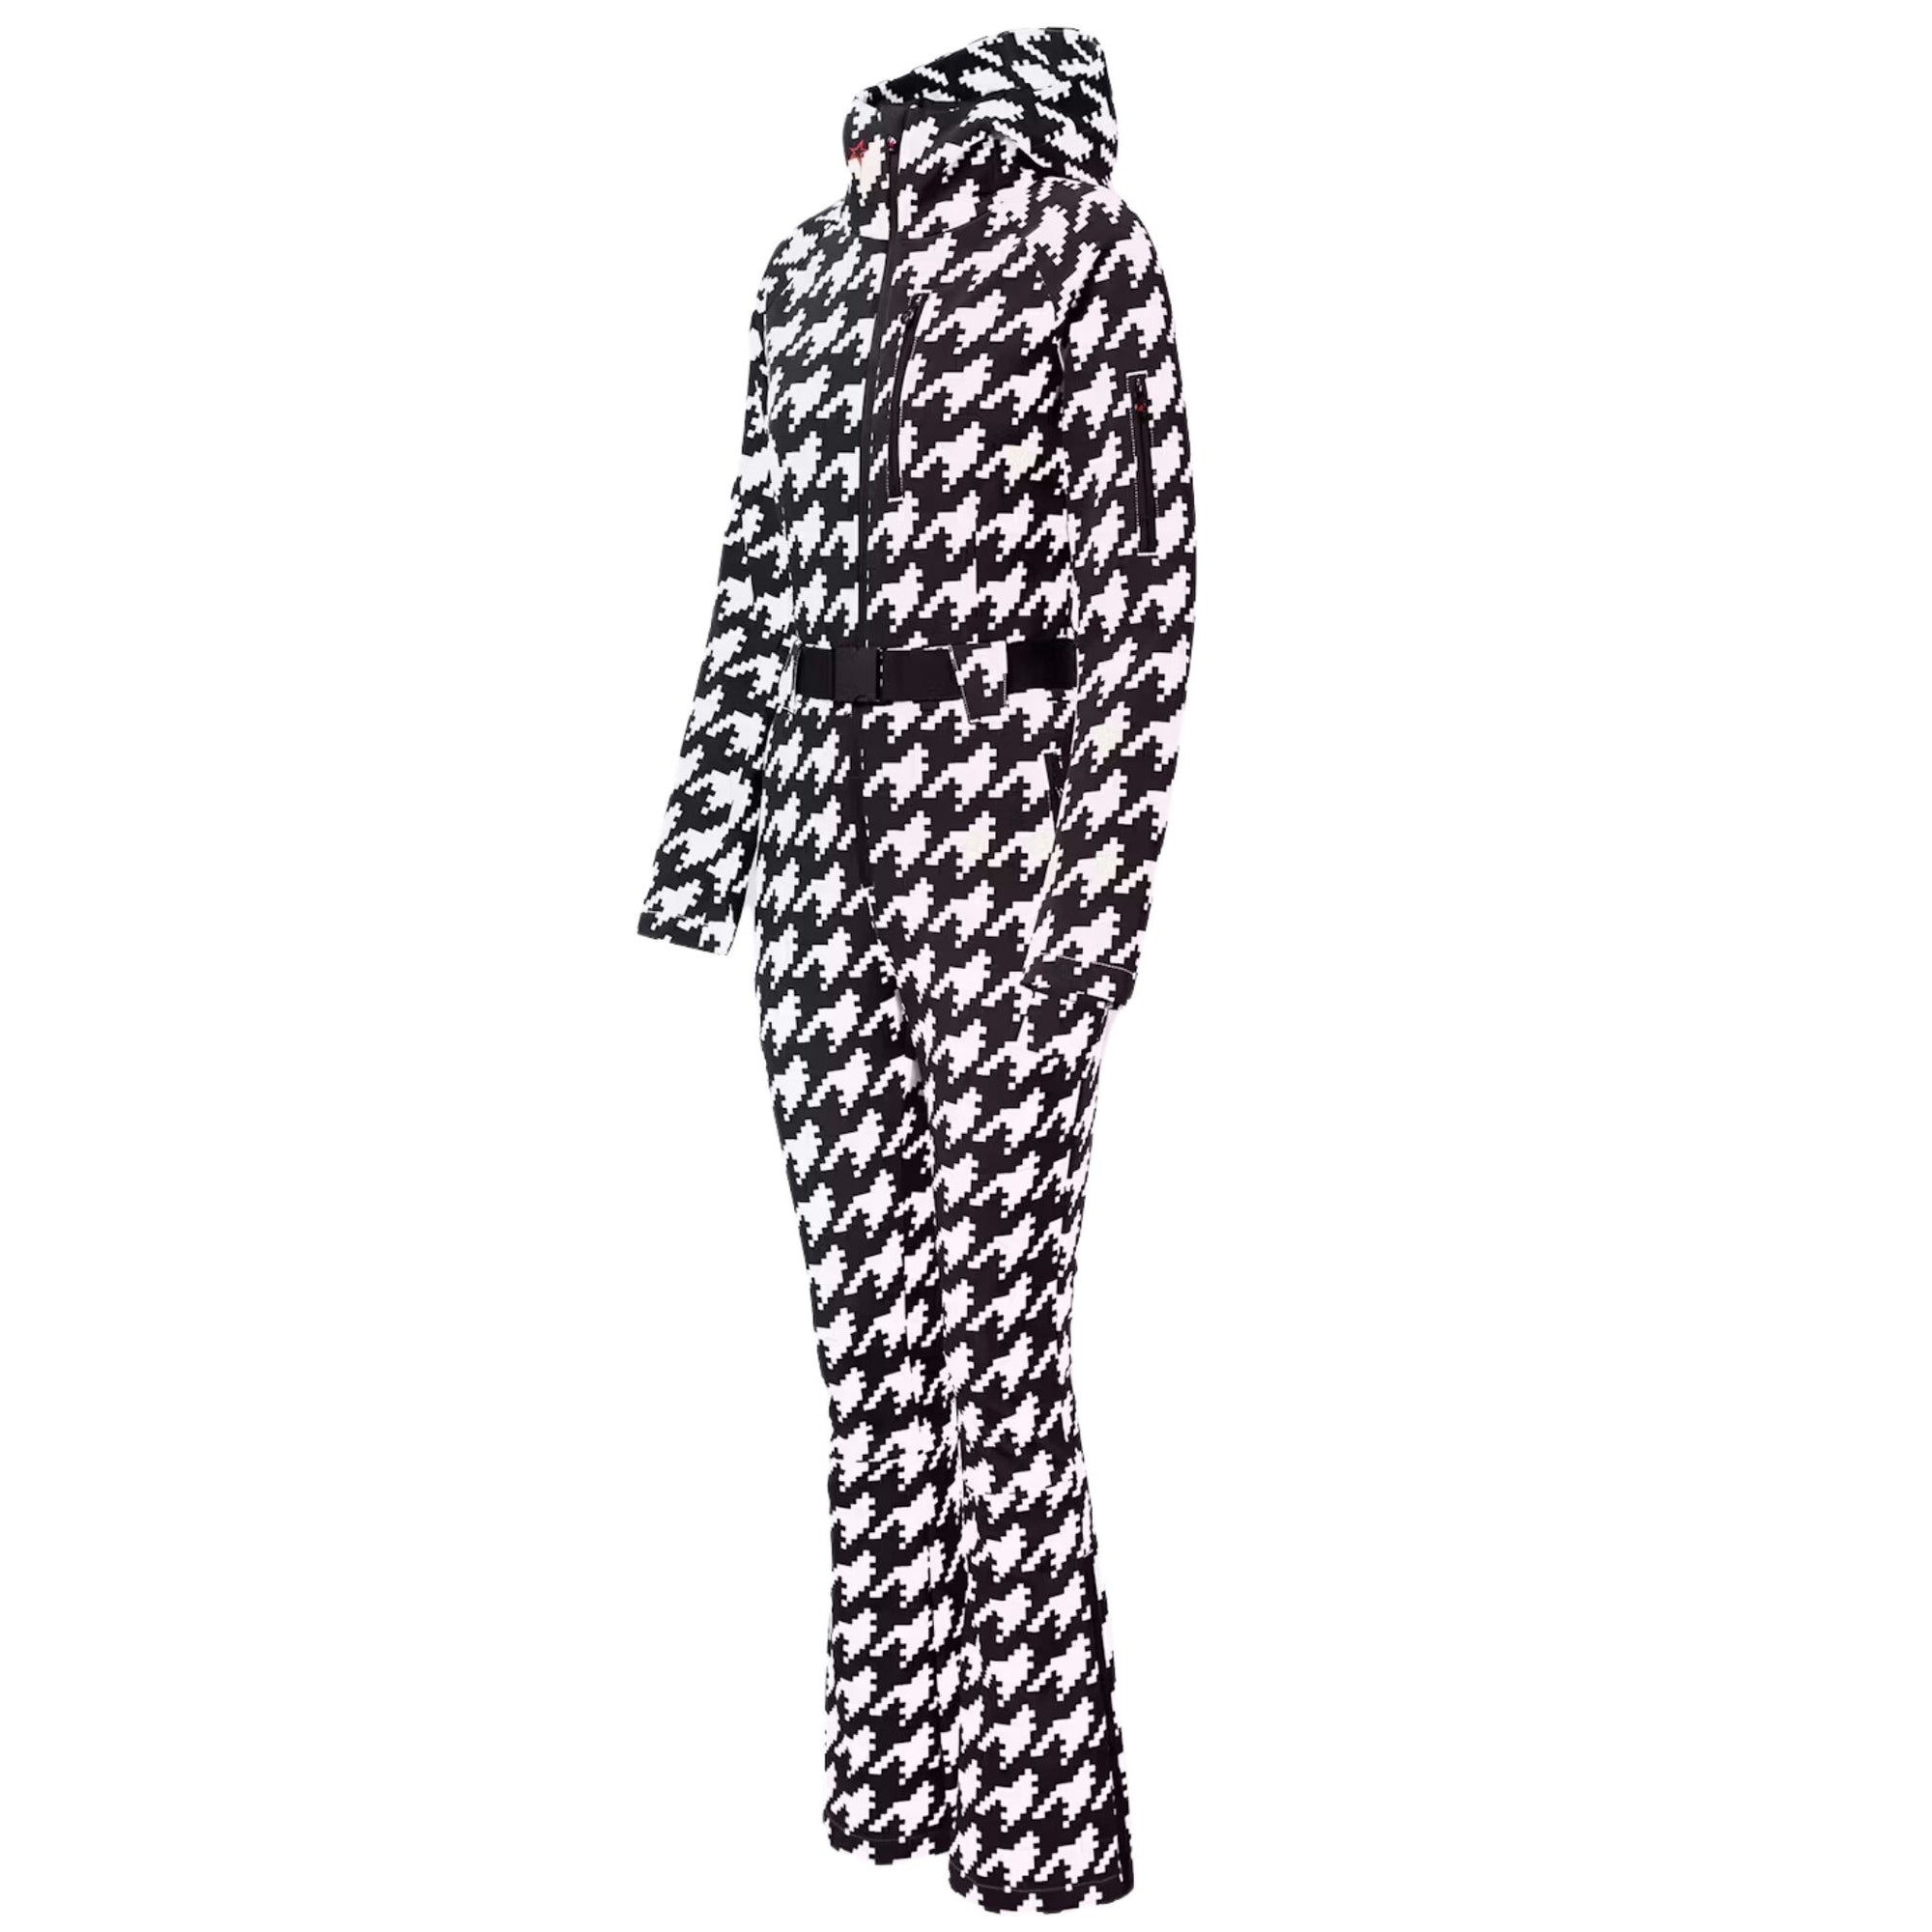 Womens Perfect Moment Houndstooth Ski Suit - Black/Snow White One Piece Suits Perfect Moment XS INTL / 6-8 AU 